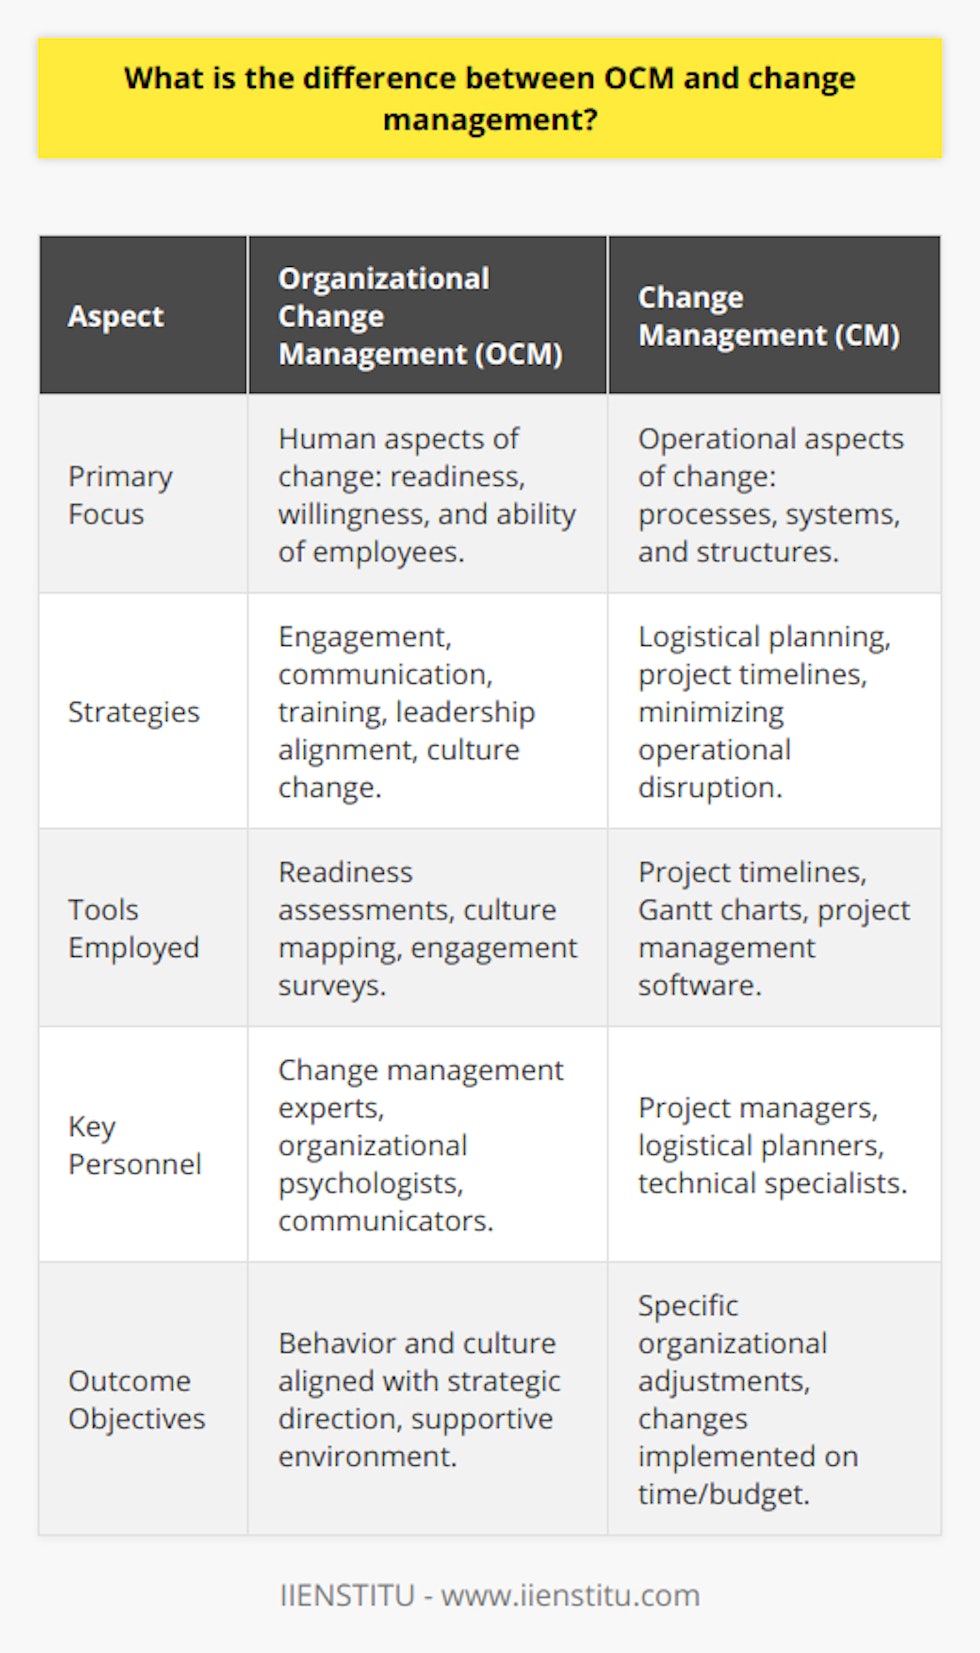 Organizational Change Management (OCM) and Change Management are two disciplines that both play a significant role in facilitating transitions within a company, yet they offer different focuses and strategies.OCM, as a practice, takes a wide-ranging approach, concentrating on the human aspects of change. It aims to ensure that the individuals within an organization are ready, willing, and able to adopt new ways of working. This involves addressing the impact on employees and managing it through engagement, communication, and training, as well as leadership alignment and culture change. OCM recognizes the emotional and behavioral adjustments necessary for successful change adoption and focuses on the people aspect, ensuring the workforce is informed, skilled, and motivated in relation to the new direction the organization is heading.In contrast, Change Management is often seen as a subset of OCM. It typically has a more operational or tactical focus, managing the project side of change and aiming to execute specific changes in processes, systems, or structures effectively. This could involve timelines, project scopes, technical requirements, and ensuring that there is minimal disruption to day-to-day operations. It's about creating detailed plans and checkpoints to ensure the change is implemented successfully from a logistical standpoint.The roles involved in OCM and Change Management can also vary. OCM teams are likely to include change management experts who specialize in human behavior, organizational psychologists, and communicators who create messaging that resonates with employees on a cultural level. In contrast, Change Management teams are generally made up of project managers who handle the detailed scheduling and roll-out of the change, along with professionals who understand the technical aspects of the change being implemented.While OCM employs tools like readiness assessments or culture mapping, Change Management utilizes project timelines, Gantt charts, and standard project management software to plan and execute changes. OCM focuses on creating a supportive environment where change is welcomed and embraced by dealing with resistance and engaging employees through their journey, while Change Management is concerned with the technical delivery and whether the change is implemented on time and within budget.When it comes to alignment with organizational goals, OCM ensures that the workforce behavior and culture are in sync with the strategic direction of the company, encouraging individuals to adopt and drive change themselves. Change Management concentrates on the specific adjustments needed in the organization to reach its objectives and employs tools and methodologies to achieve tactical goals.In essence, OCM is about creating a supportive culture and environment for change, with a strong emphasis on the human element. It lays the groundwork for a smooth transition by enabling individuals to embrace new methods and strategies wholeheartedly. Change Management, meanwhile, is the roadmap for the change itself – the process, tools, and plans that turn the concept of change into reality.Understanding and leveraging these distinctions help businesses ensure a thorough and inclusive approach to managing change, catering to both the technical requirements of the change process and the emotional and behavioral needs of employees. This sophisticated interplay contributes to a more resilient and flexible organization that can navigate the complexities of change more effectively.